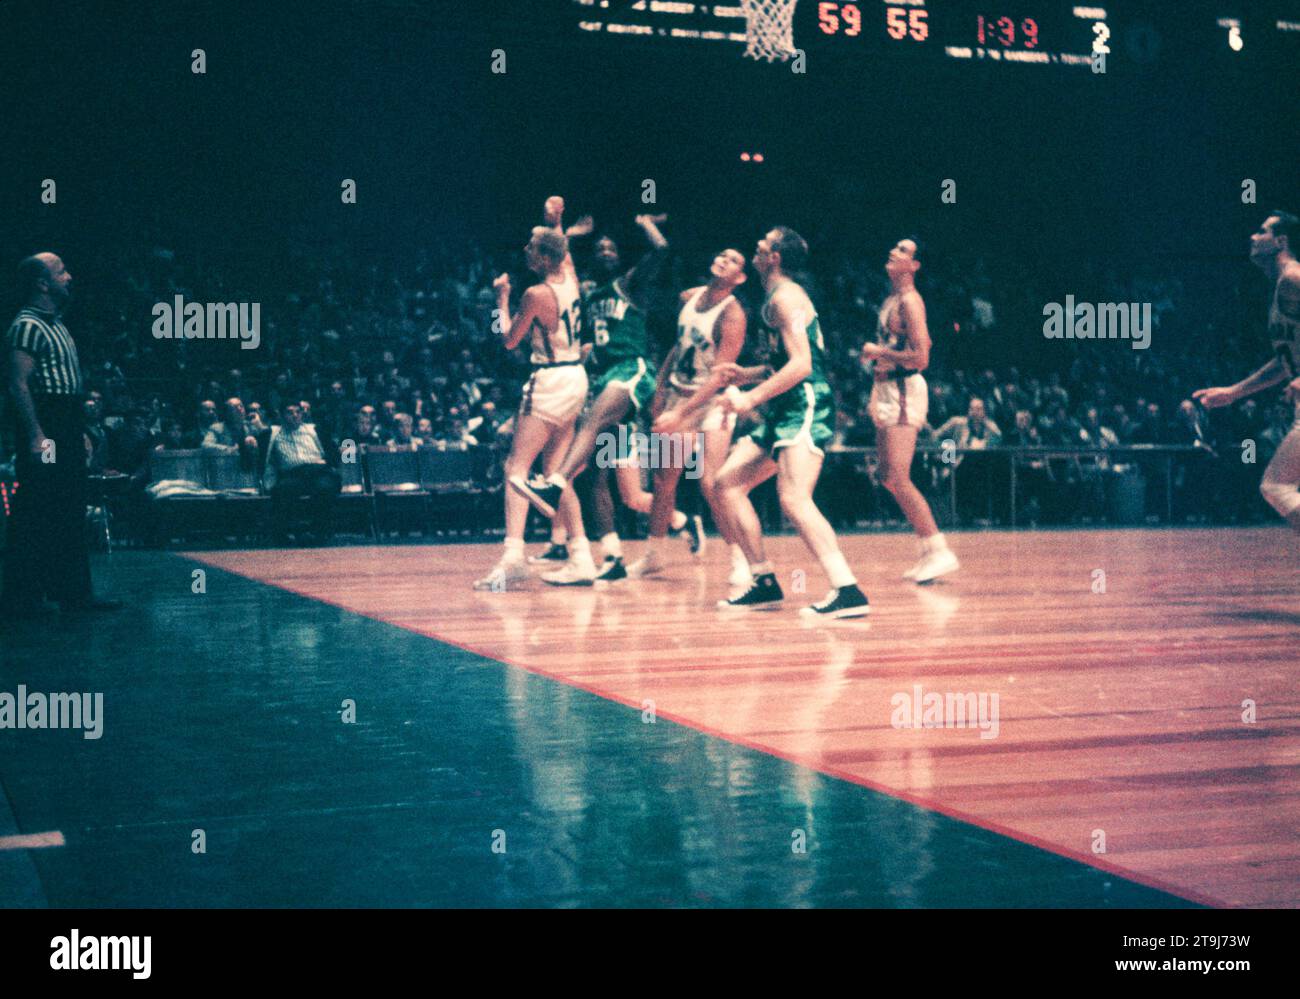 NEW YORK, NY - OCTOBER 25: Bill Russell #6 of the Boston Celtics shoots as Kenny Sears #12 and Charlie Tyra #14 of the New York Knicks defend during an NBA game on October 25, 1958 at the Madison Square Garden in New York, New York.  (Photo by Hy Peskin) *** Local Caption *** Bill Russell;Kenny Sears;Charlie Tyra Stock Photo